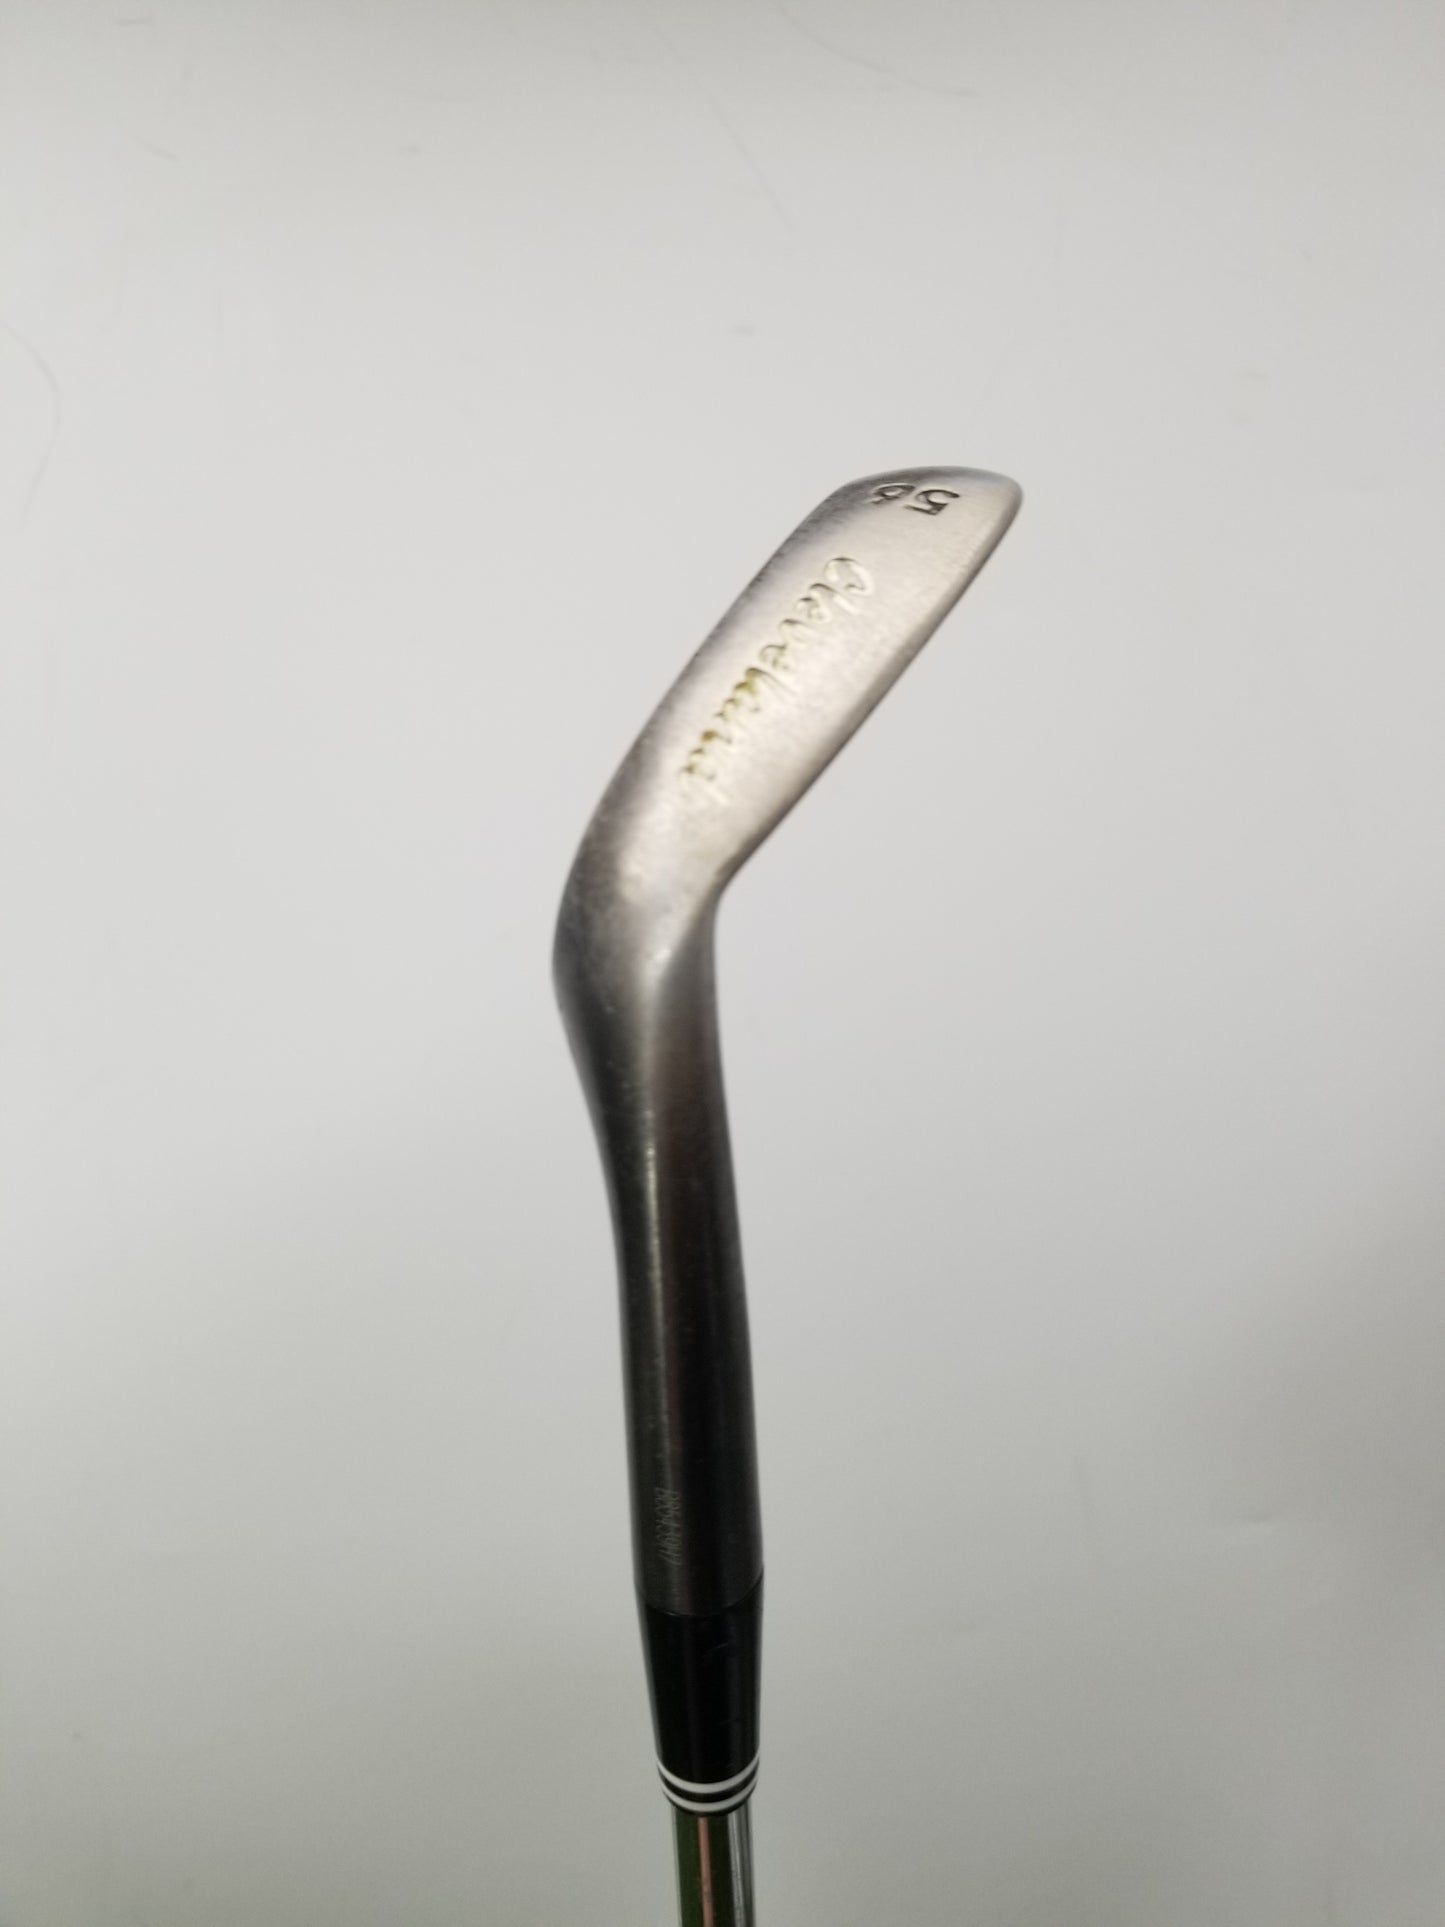 2007 CLEVELAND CG14 BLACK PEARL WEDGE 56* WEDGE FLEX CLEV TRACTION 35.5 GOOD